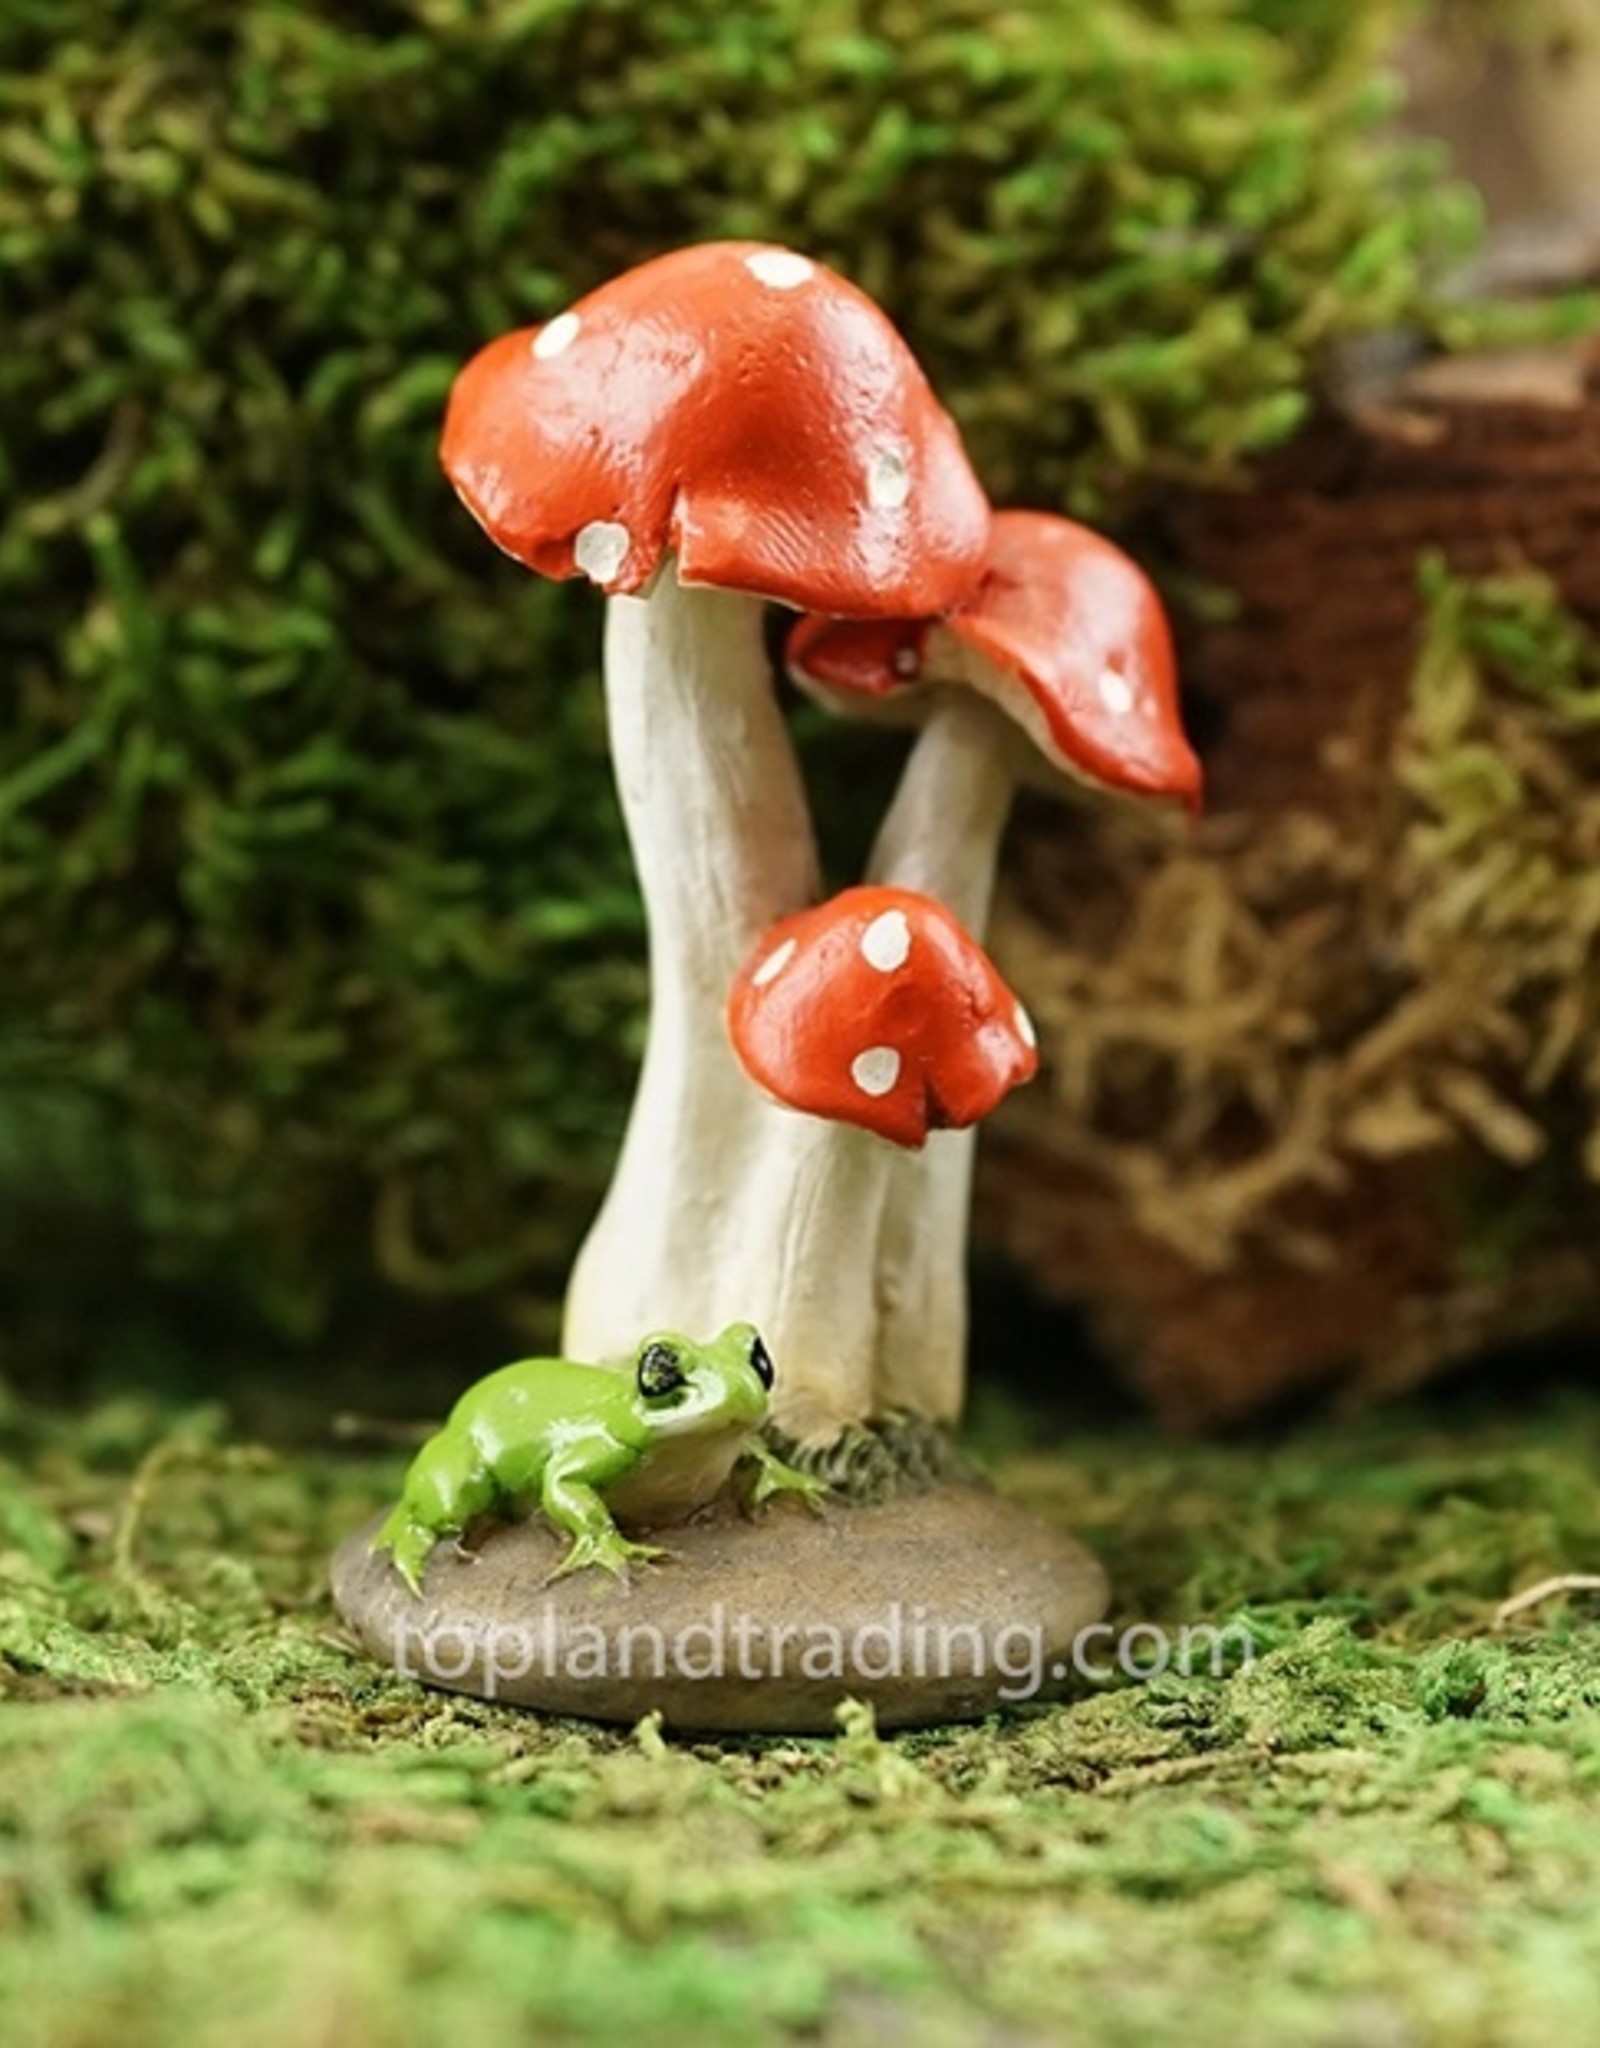 Top Land Trading MINI FROG WITH RED MUSHROOMS